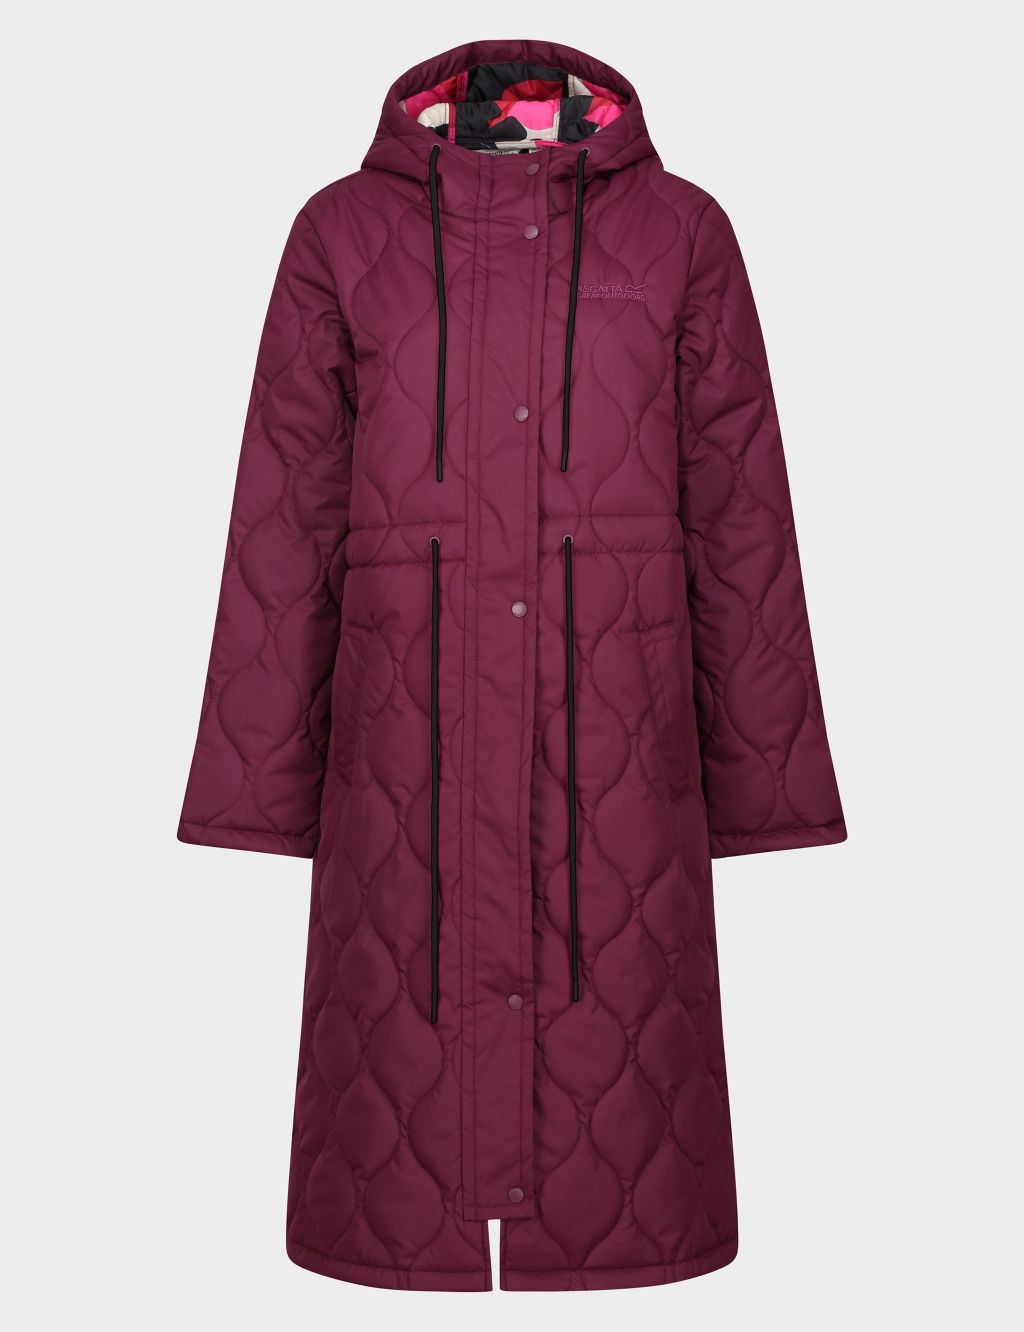 Orla Kiely Quilted Water-Repellent Longline Coat image 2